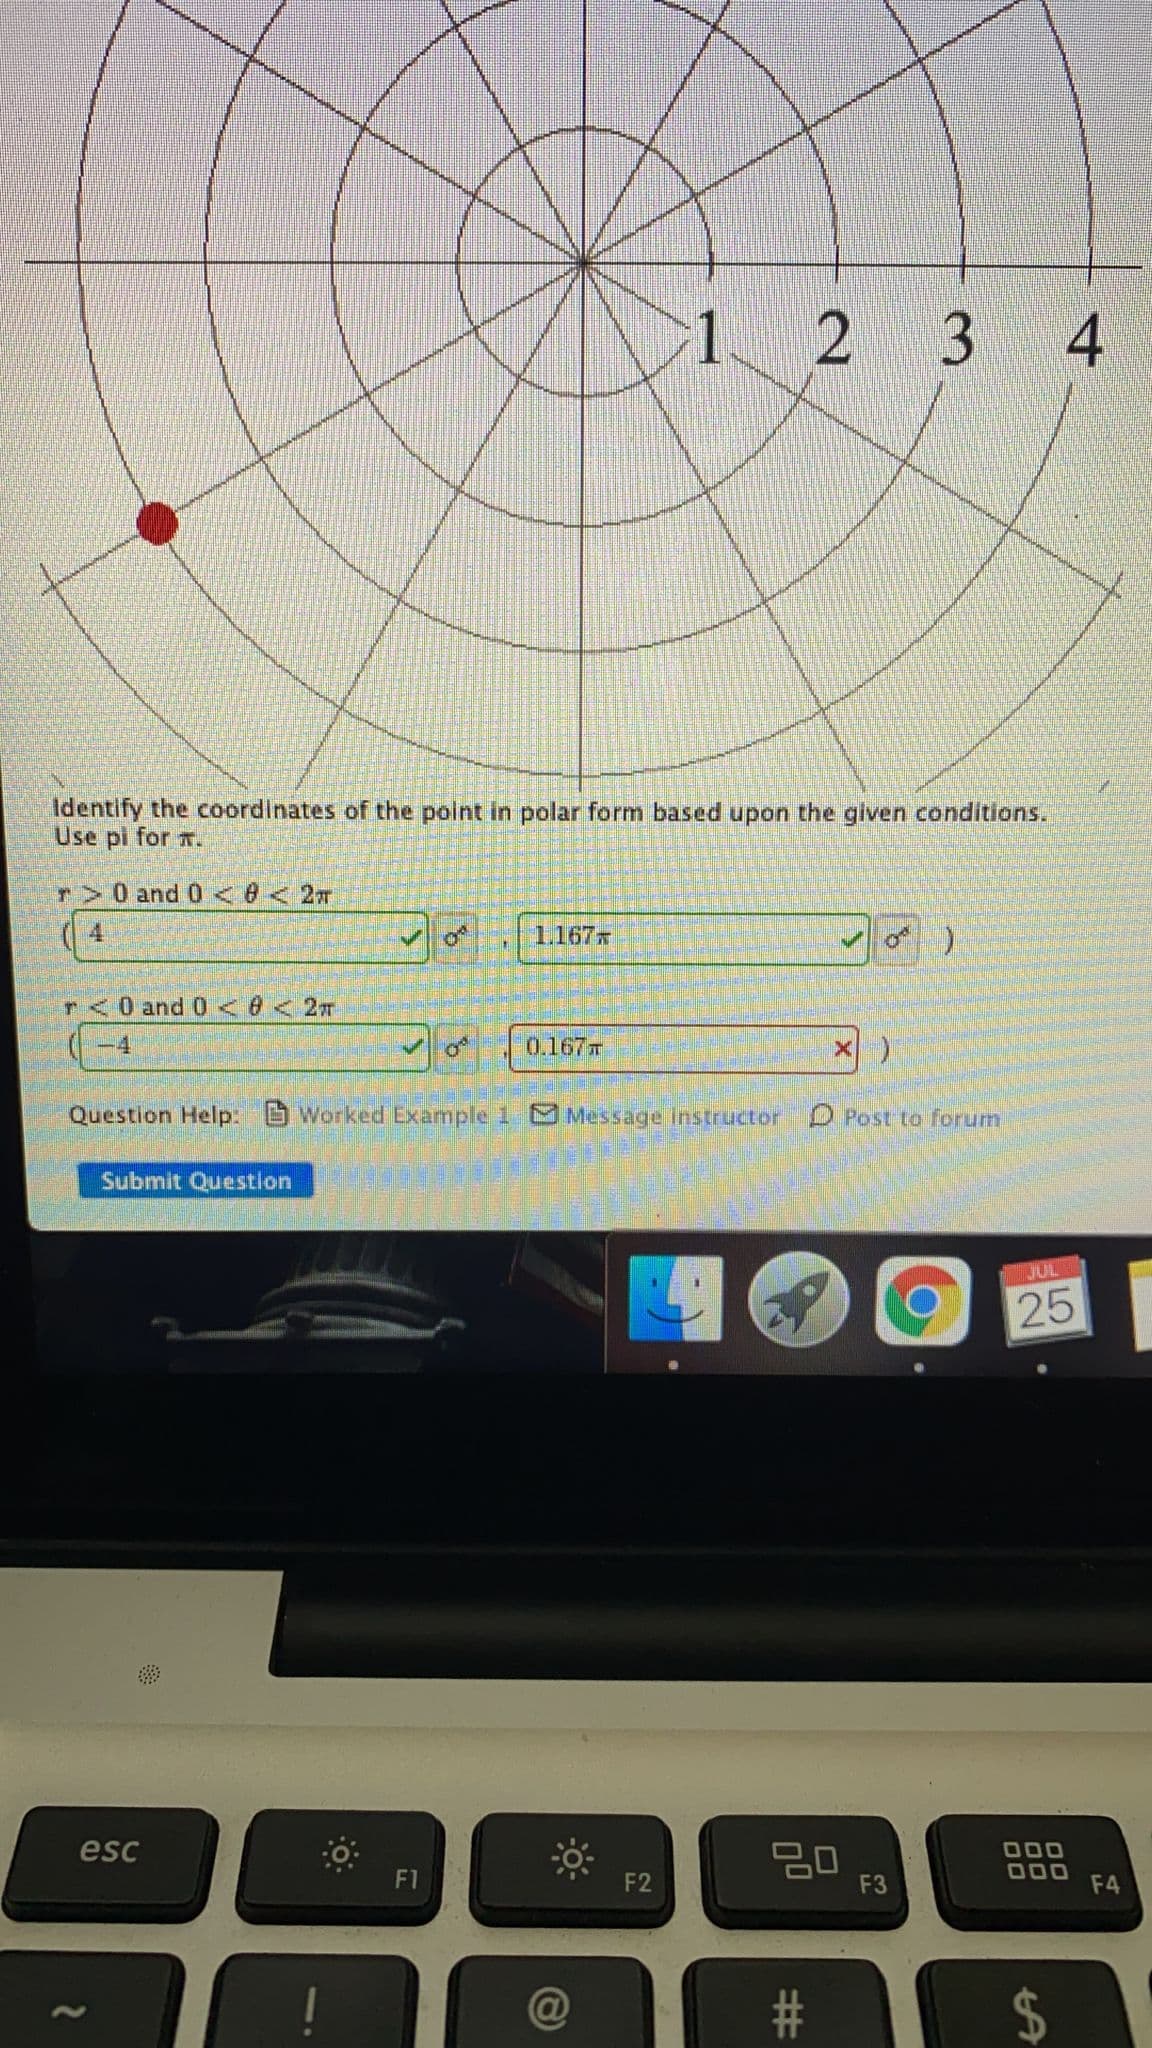 1 2 3 4
Identify the coordinates of the point in polar form based upon the given conditions.
Use pi for T.
T
r>0and 0<0 < 2T
4.
1.167x
r<0 and 0 <6< 2m
-4
0.167
Question Help: Worked Example 1 Message instructor O Post to forum
Submit Question
JUL
25
esc
000
ם
F1
F2
F3
F4
2$
%3
